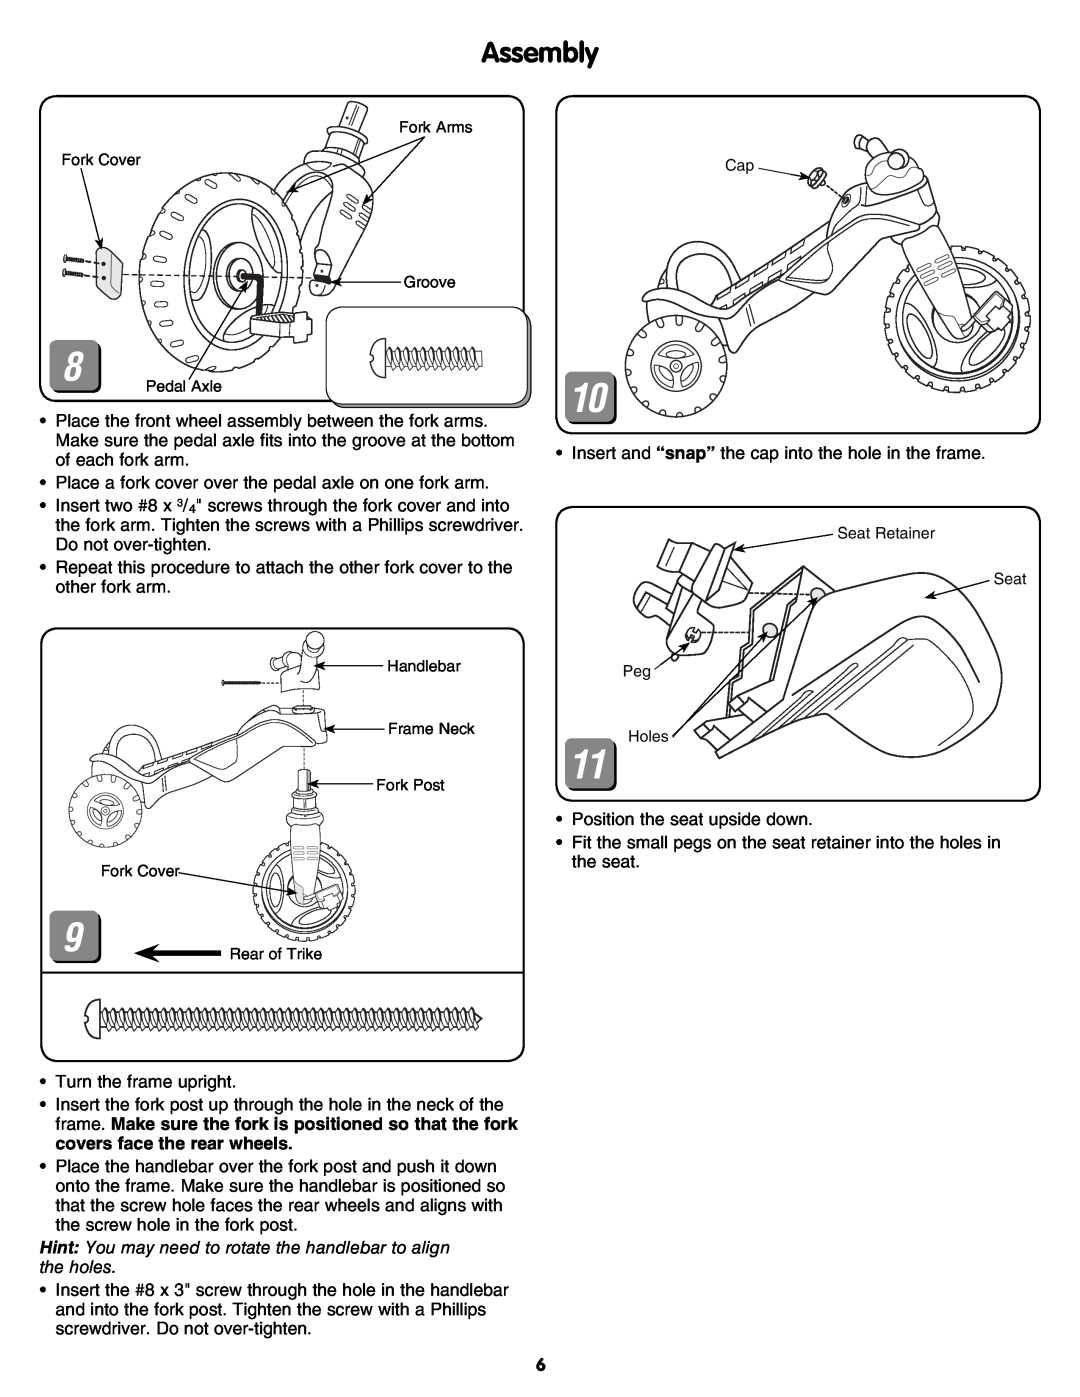 Fisher-Price M7332 manual Assembly, Place a fork cover over the pedal axle on one fork arm 